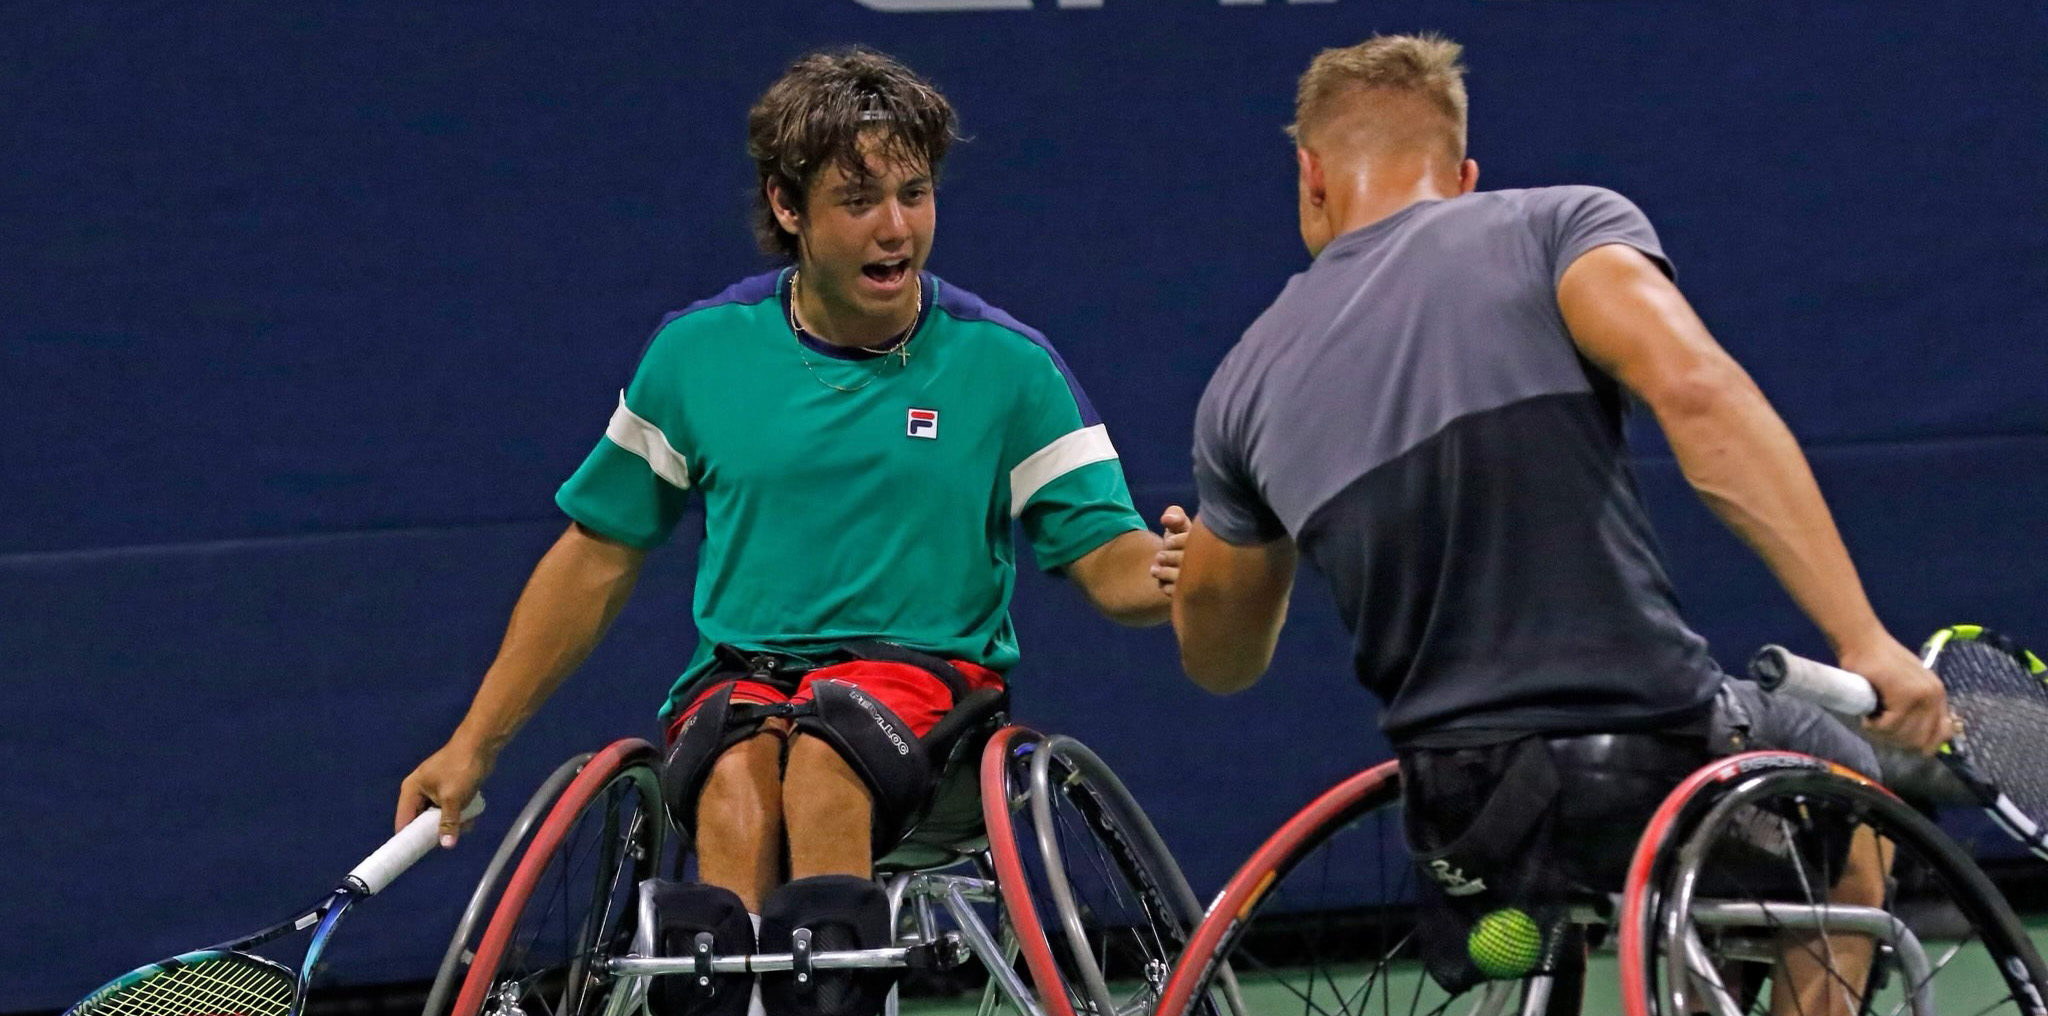 Tomas giving his partner a high five while playing wheelchair tennis in the US Open